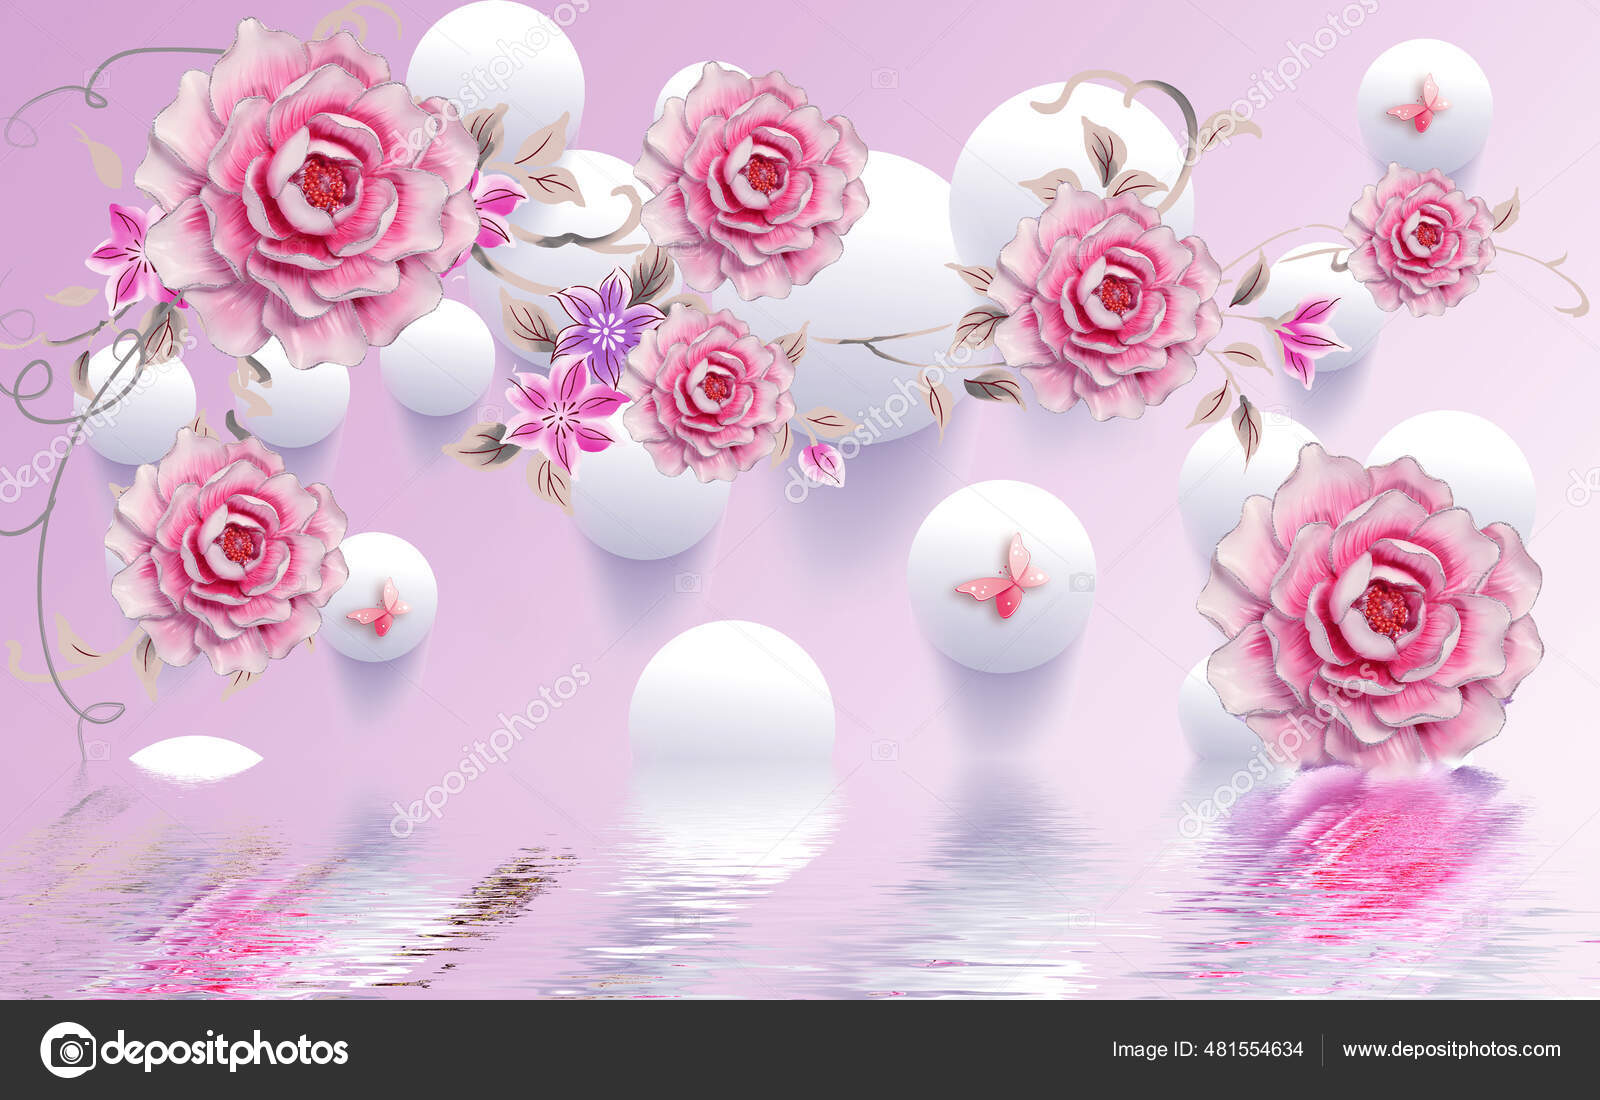 Illustration Beautiful Pink Flowers Background Wallpaper Stock Photo by  ©rinkuchoudhary06 481554634